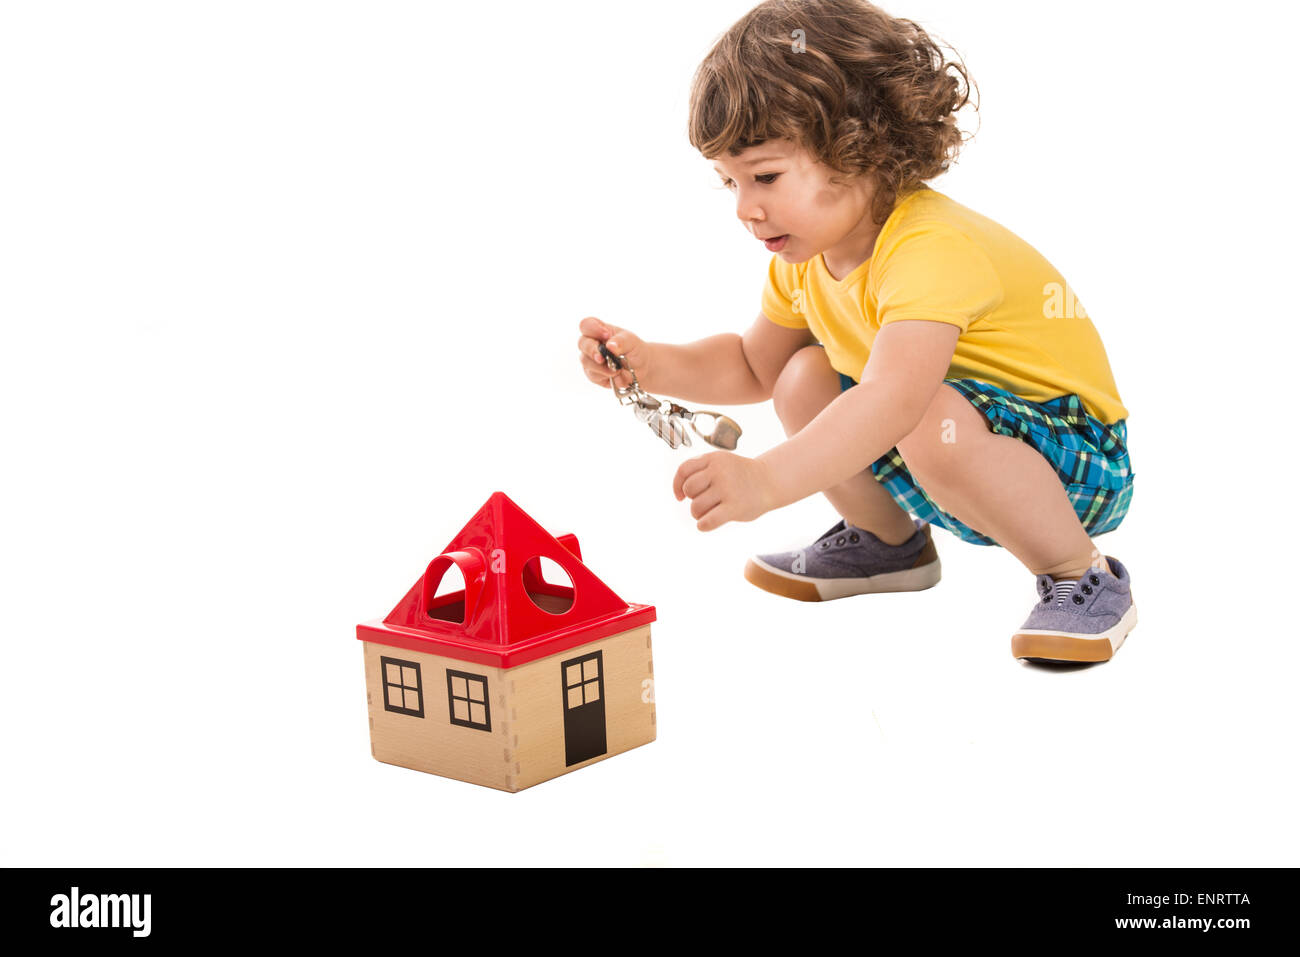 Little boy holding keys  to open  wooden house toy isolated on white background Stock Photo